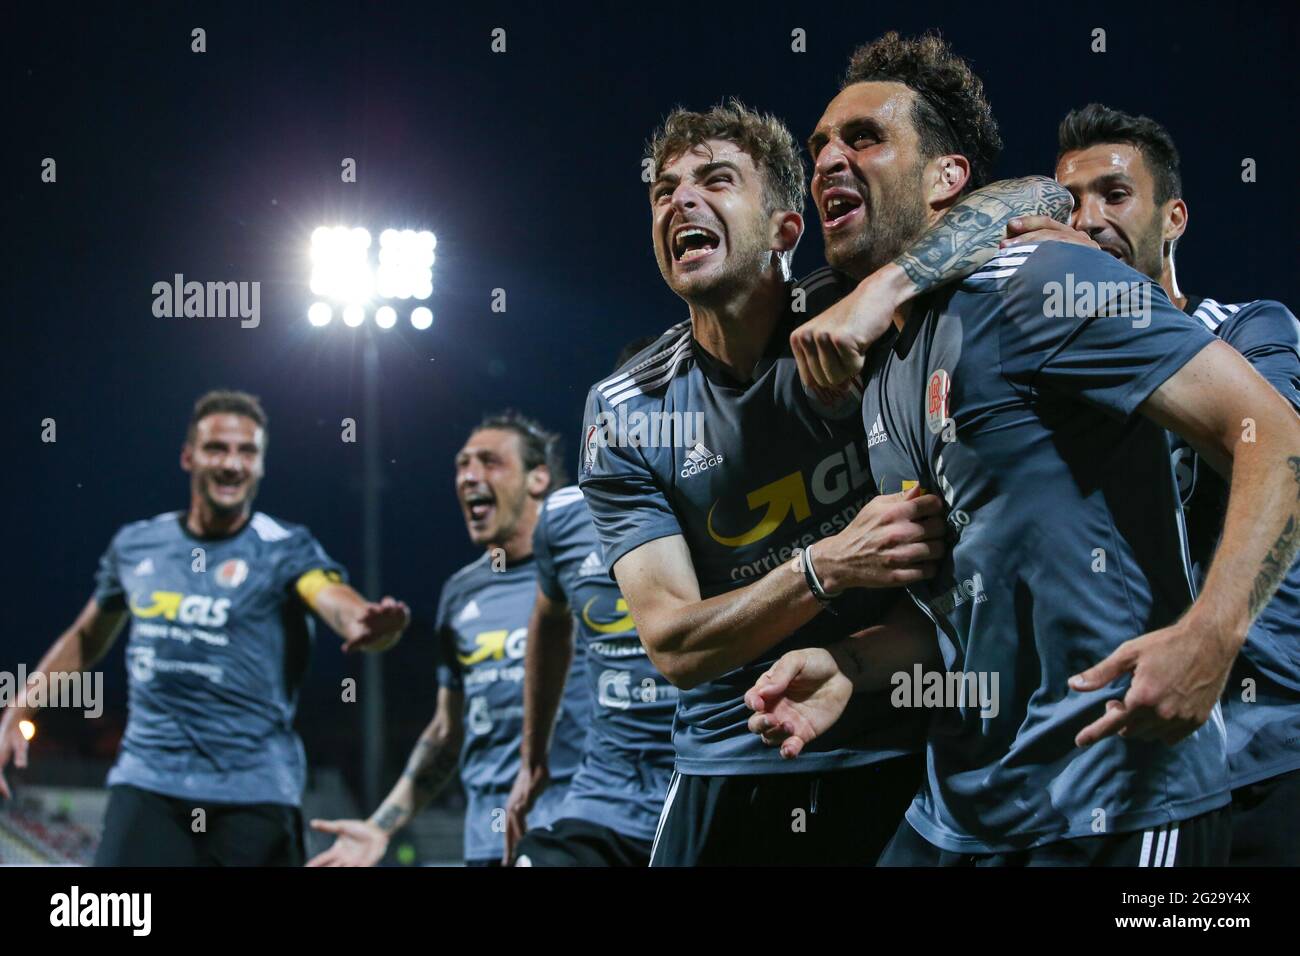 Torino, Italy, 9th June 2021. Andrea Arrighini of US Alessandria celebrates with team mates after scoring to level the game at 1-1 during the Serie C match at Stadio Giuseppe Moccagatta - Alessandria, Torino. Picture credit should read: Jonathan Moscrop / Sportimage Stock Photo